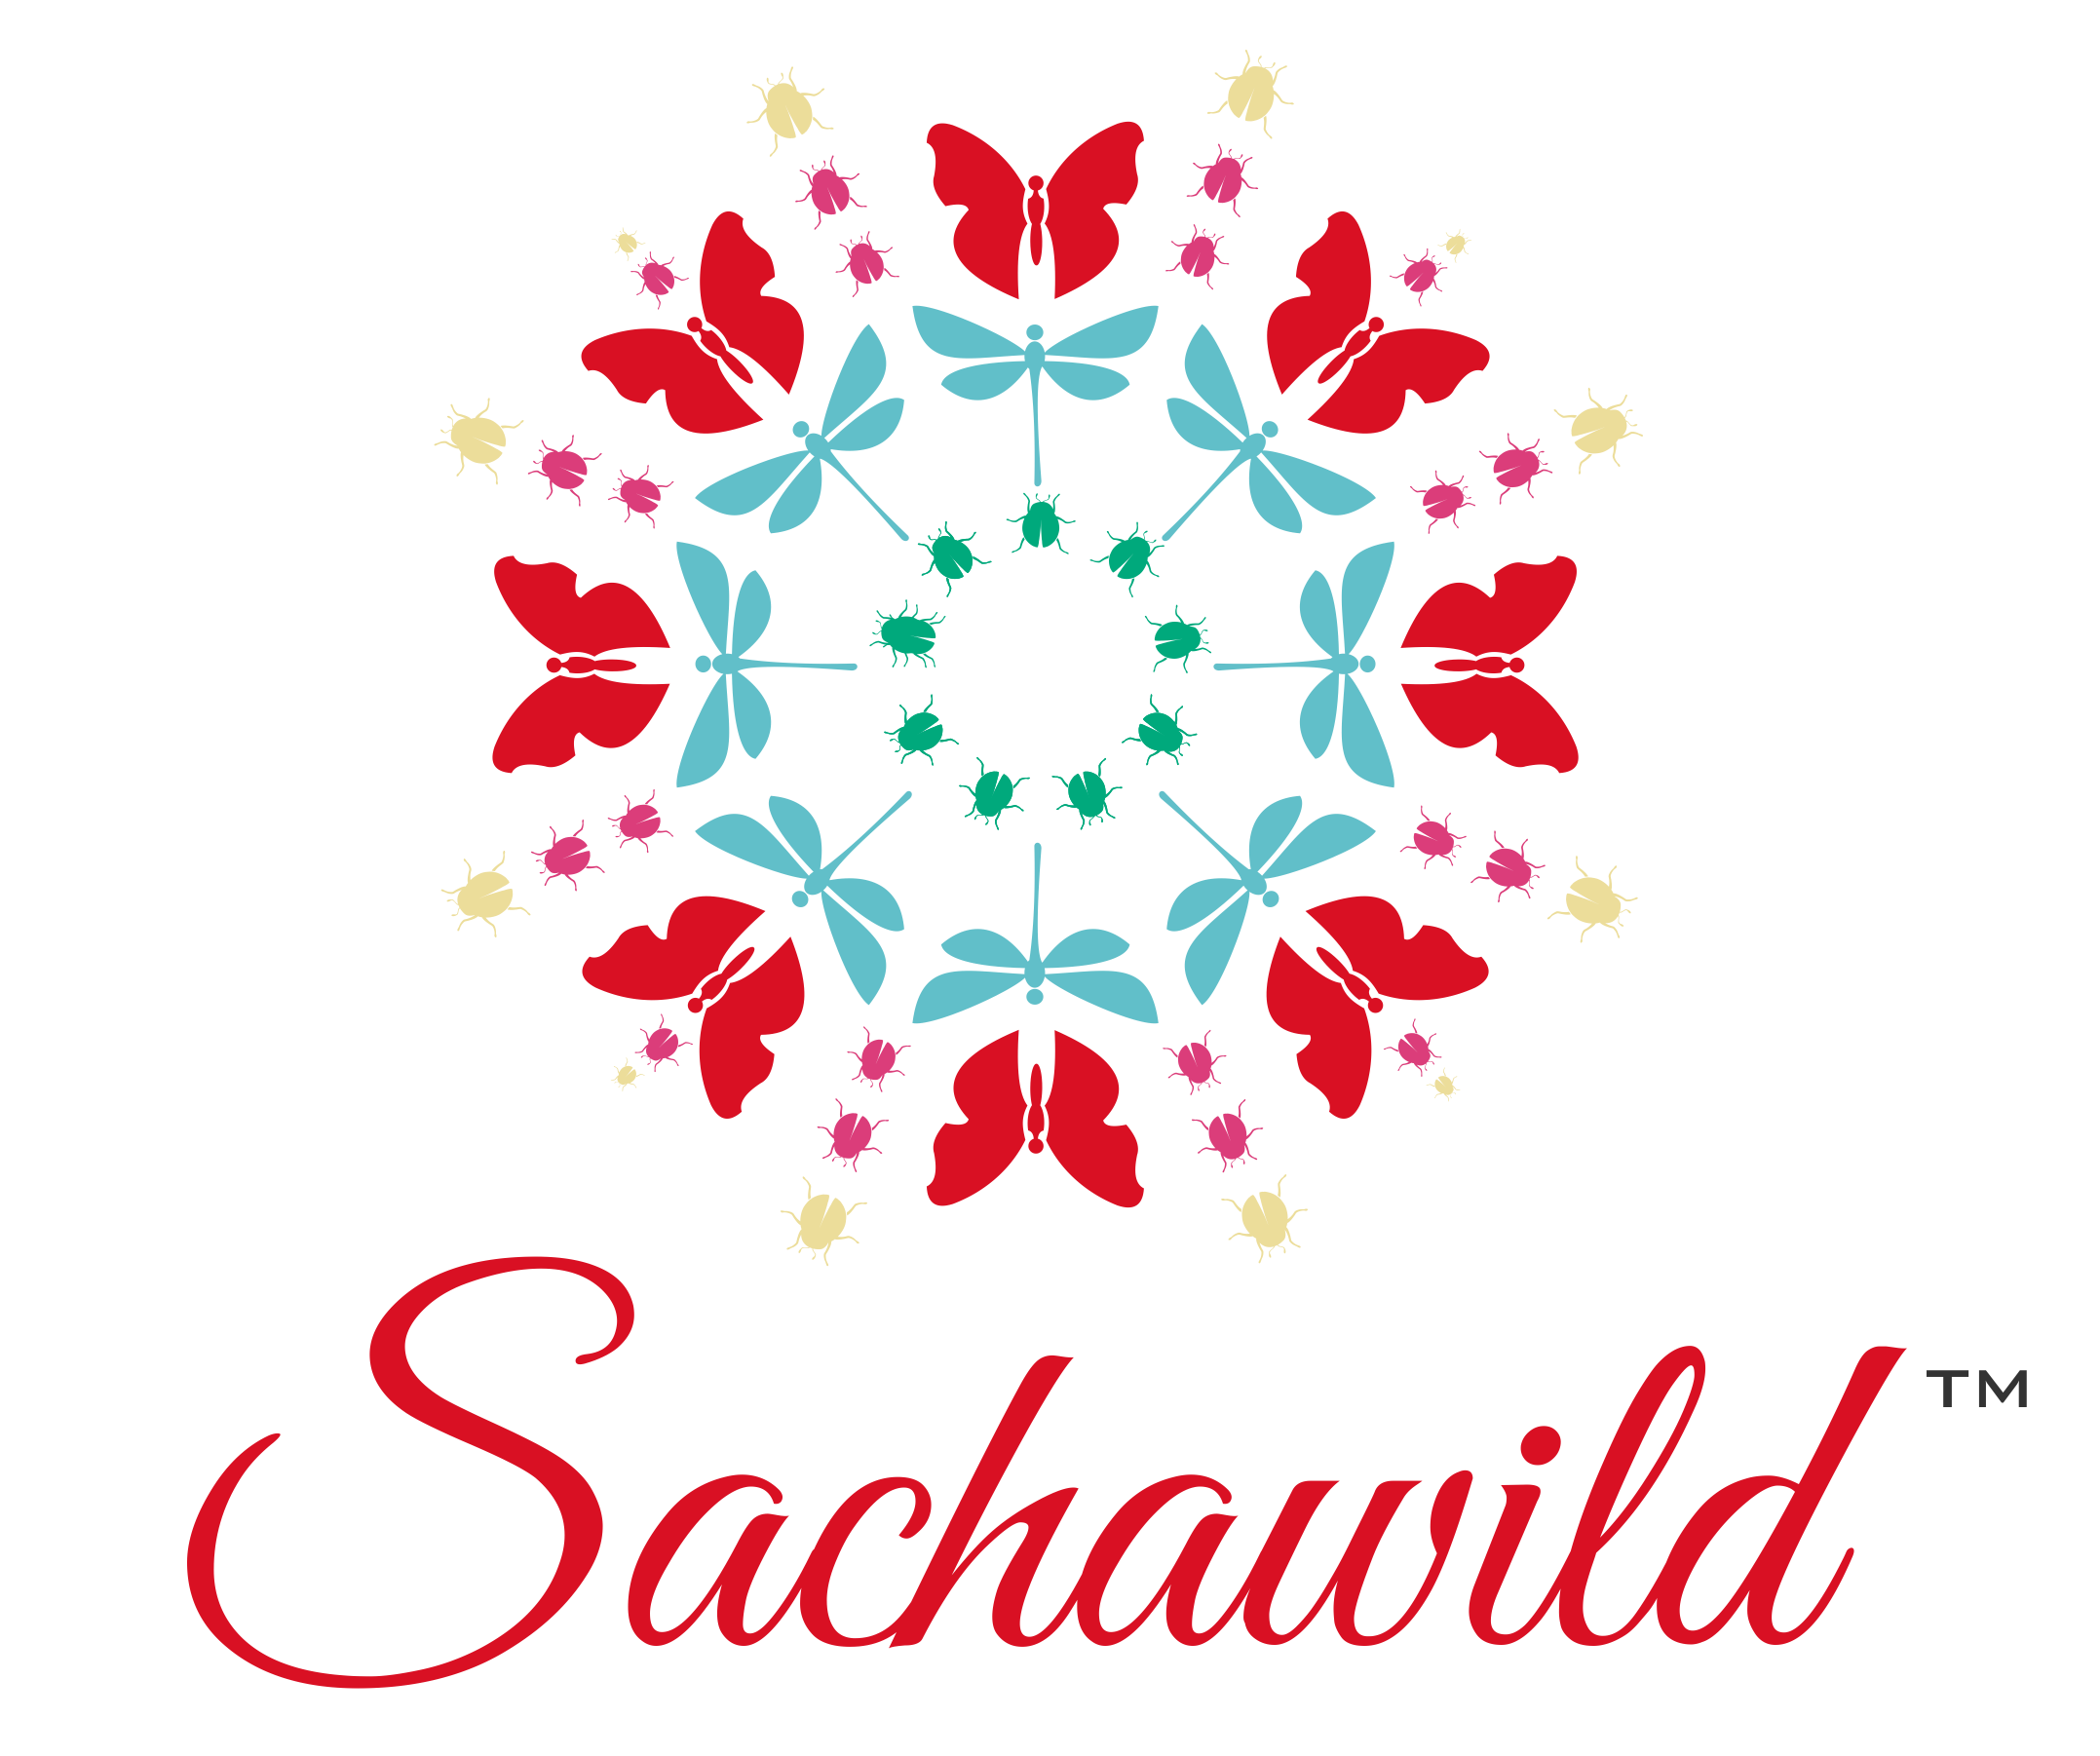 Sachawild neotropical dried insect sale e-shop